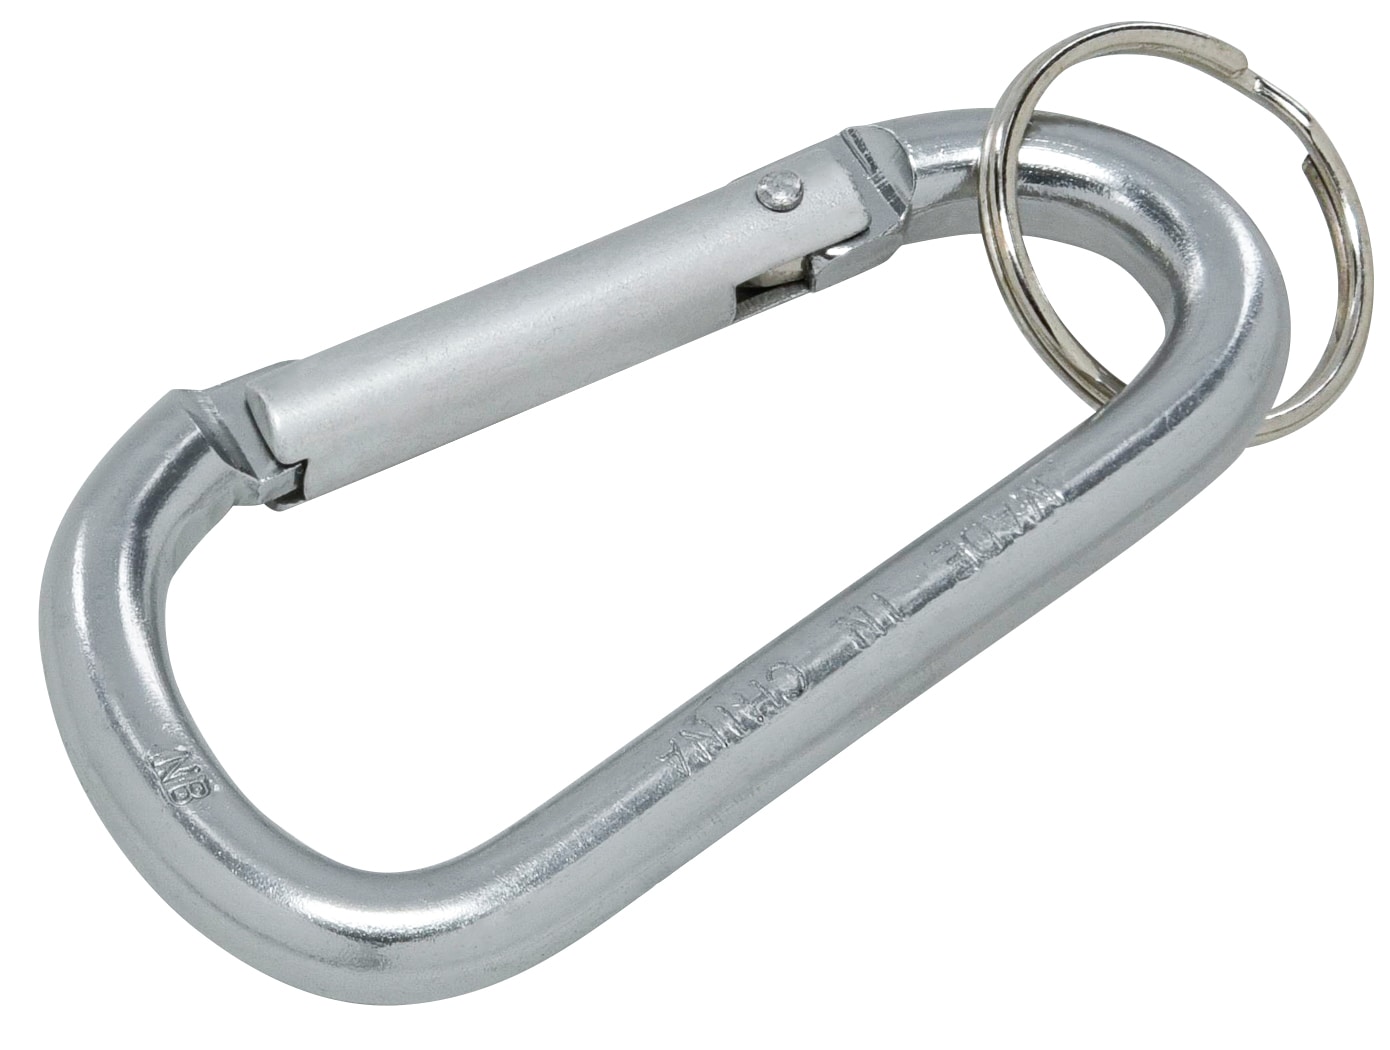 Minute Key 5.2-in D-shaped Straight Carabiner in the Carabiners department  at